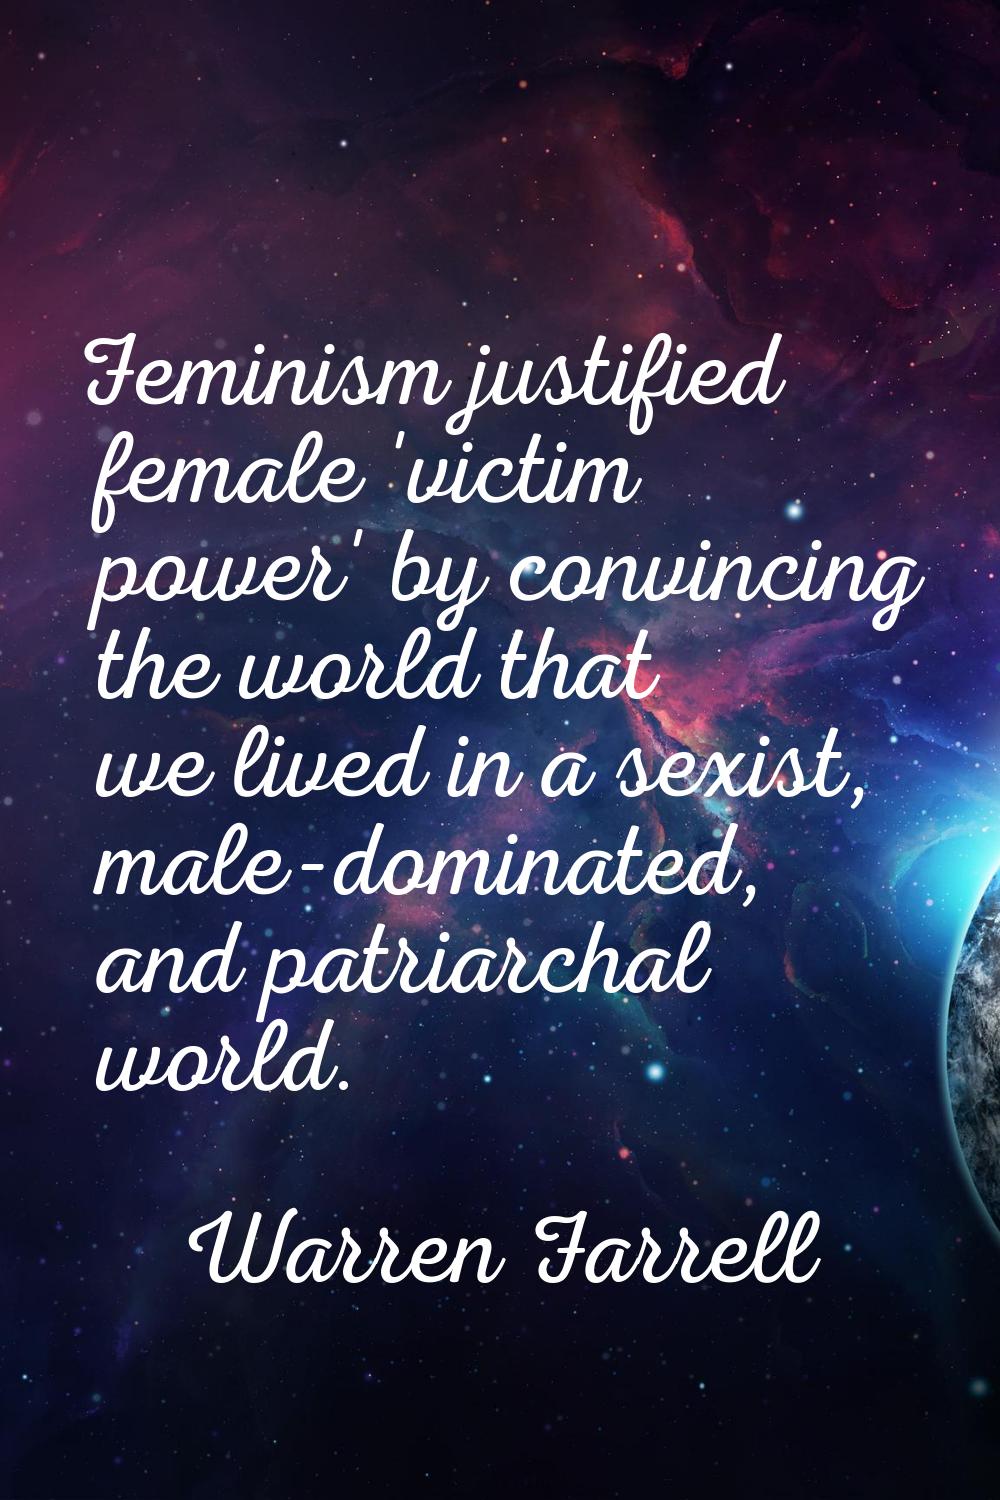 Feminism justified female 'victim power' by convincing the world that we lived in a sexist, male-do